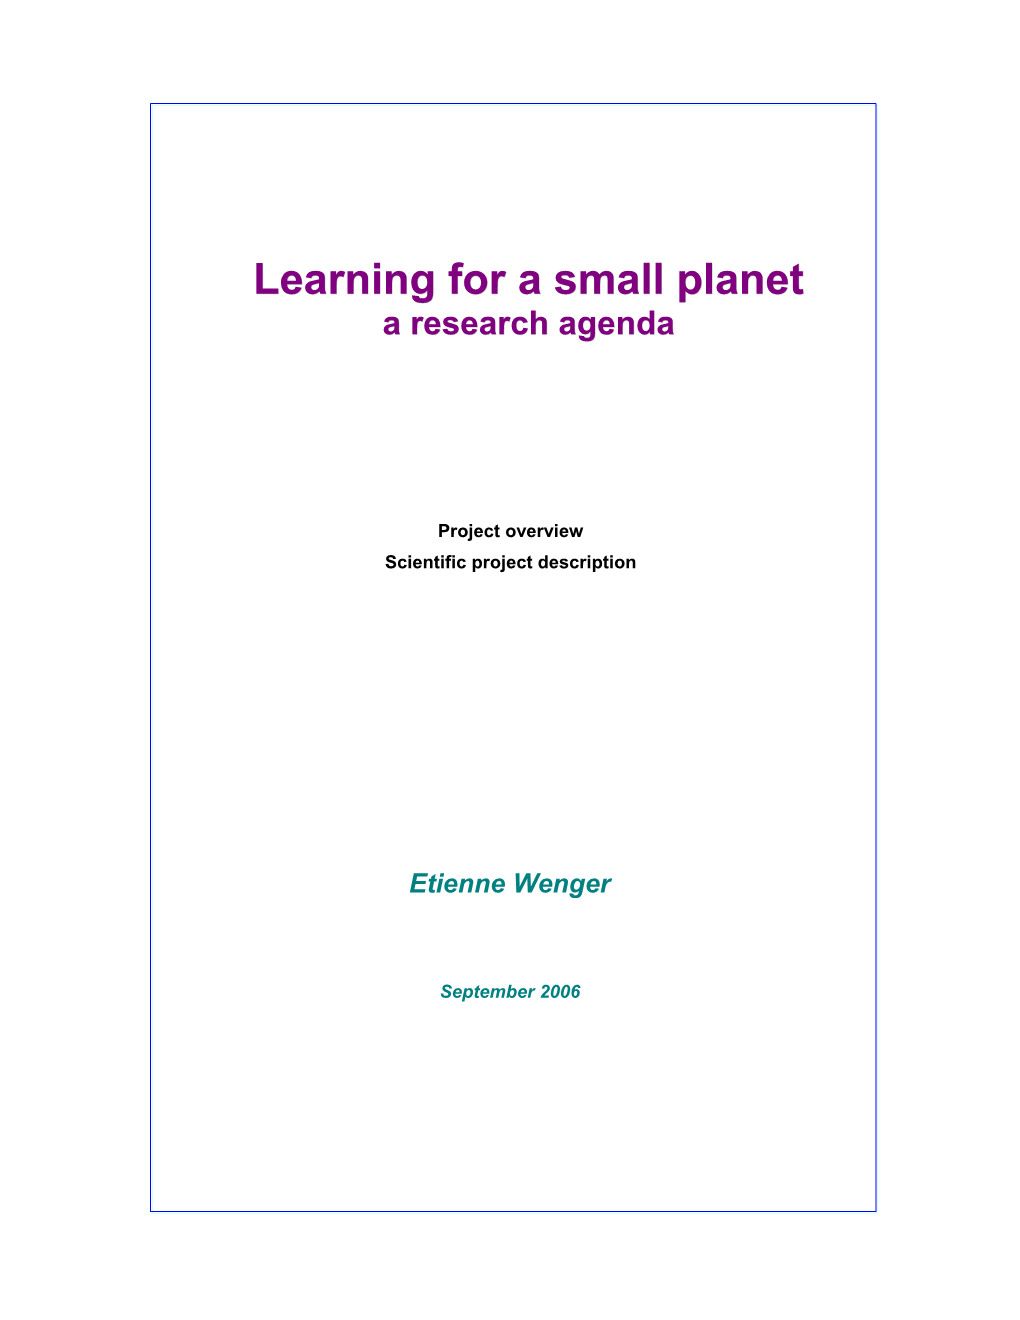 Learning for a Small Planet